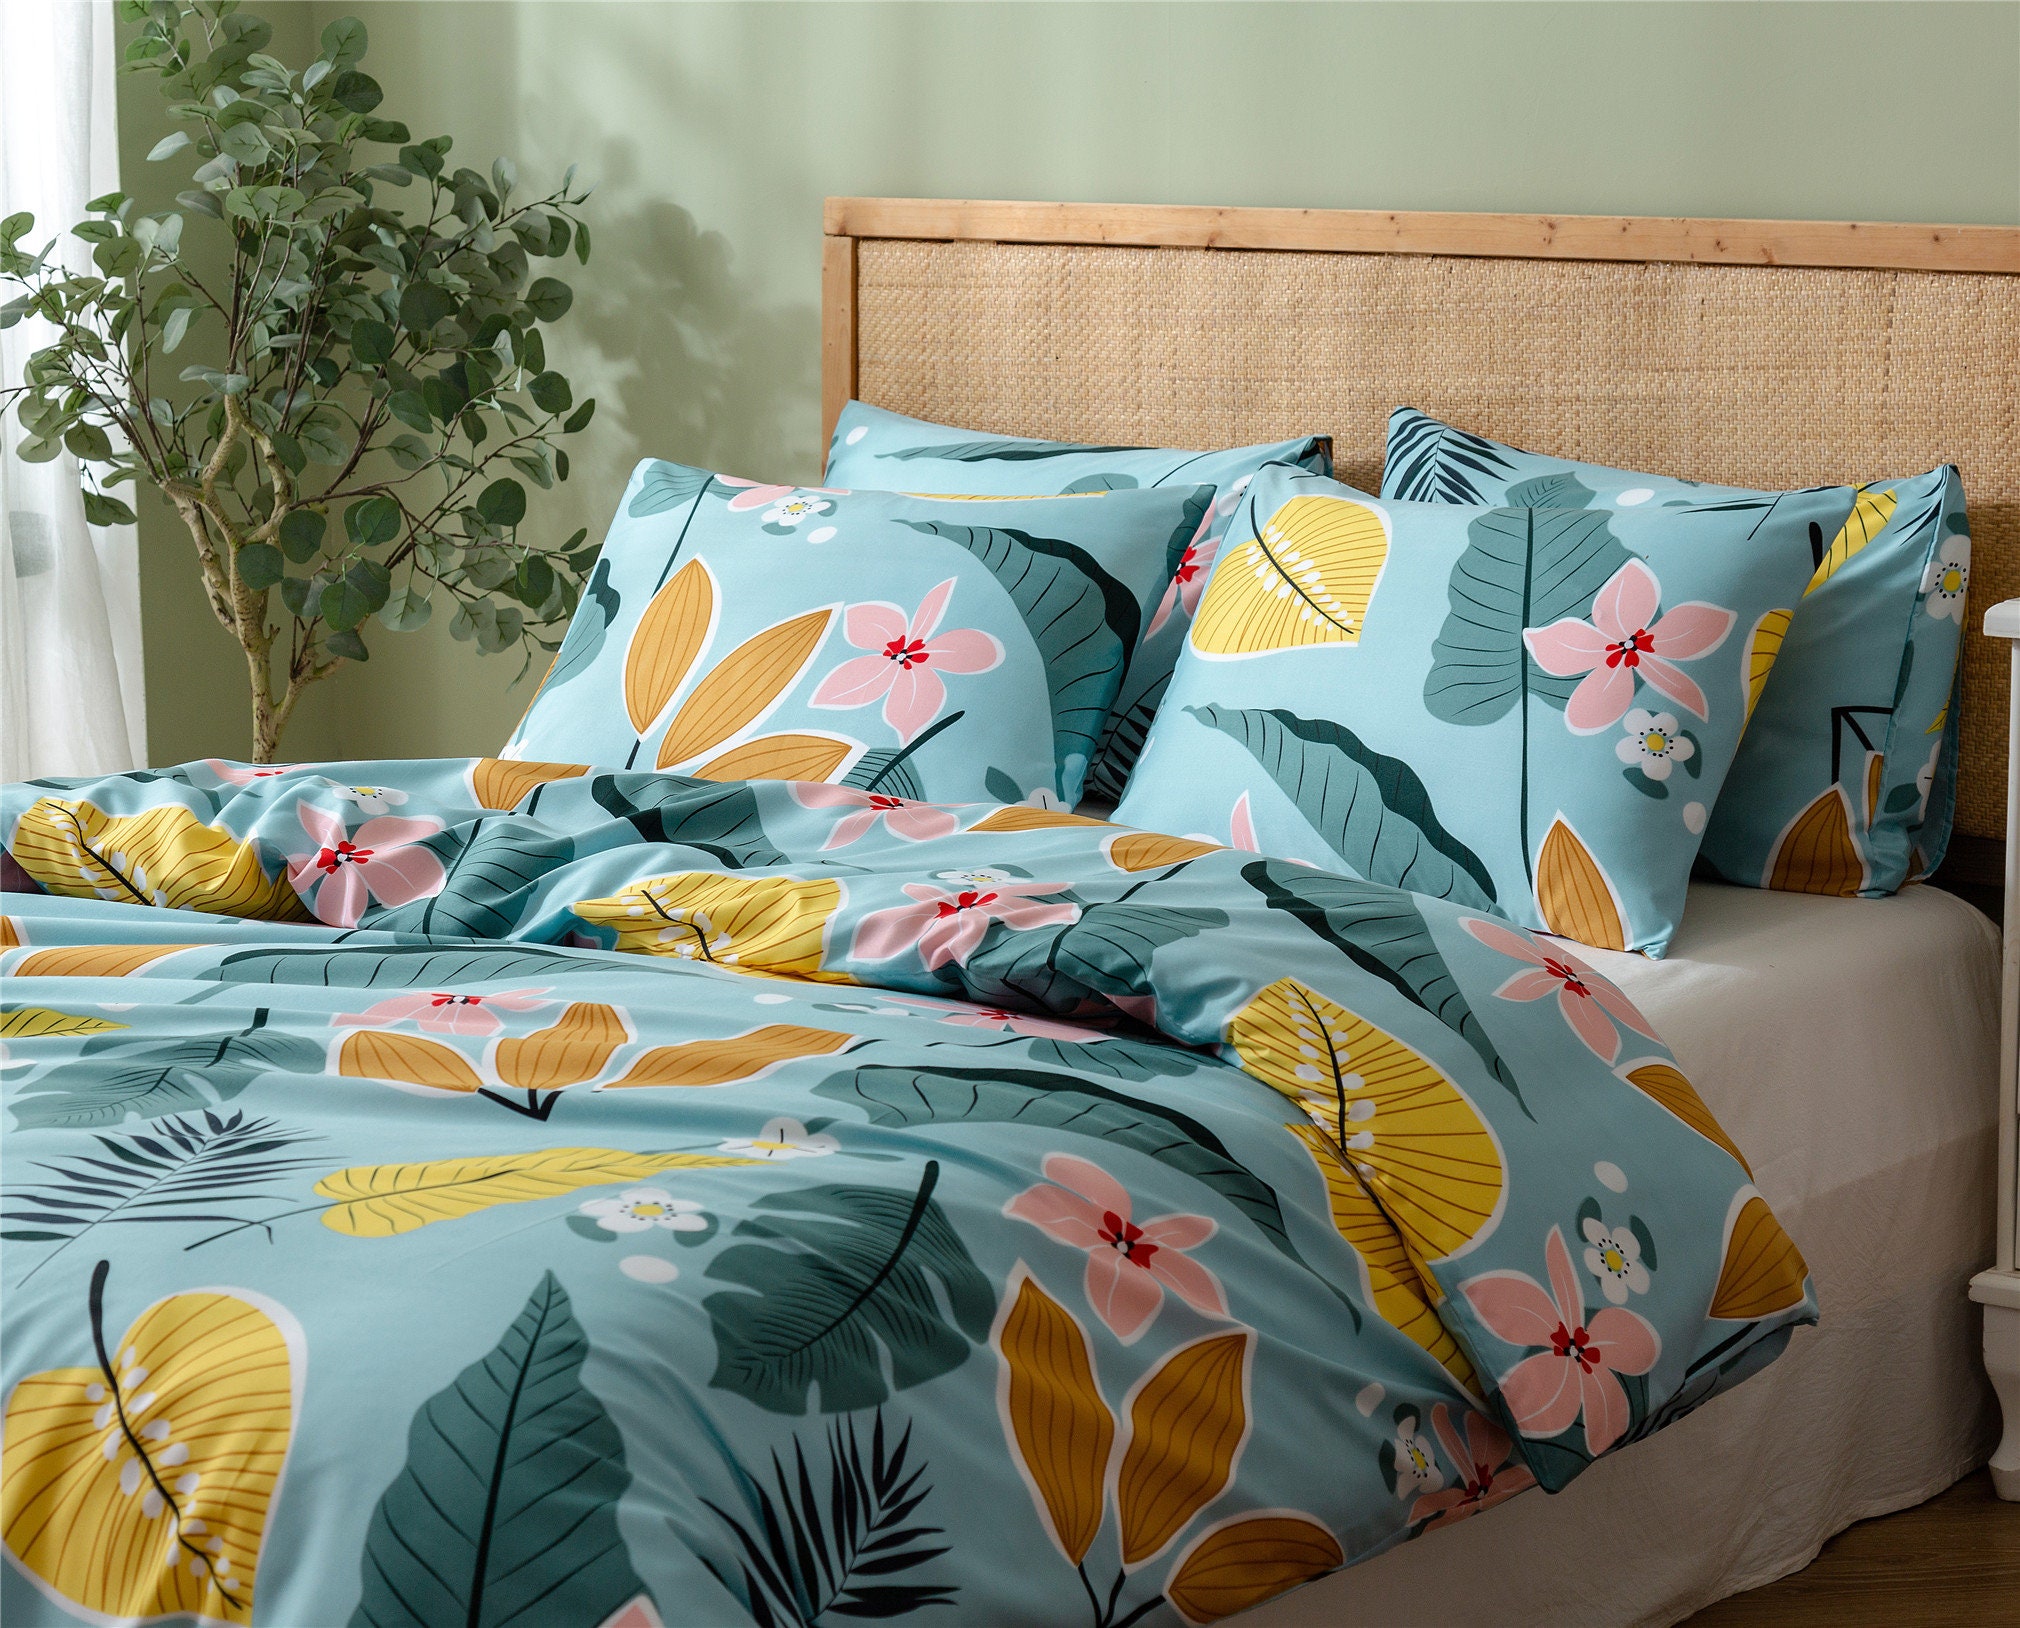 Blue Plants Duvet Cover Floral Comforter Cover With Pillow - Etsy